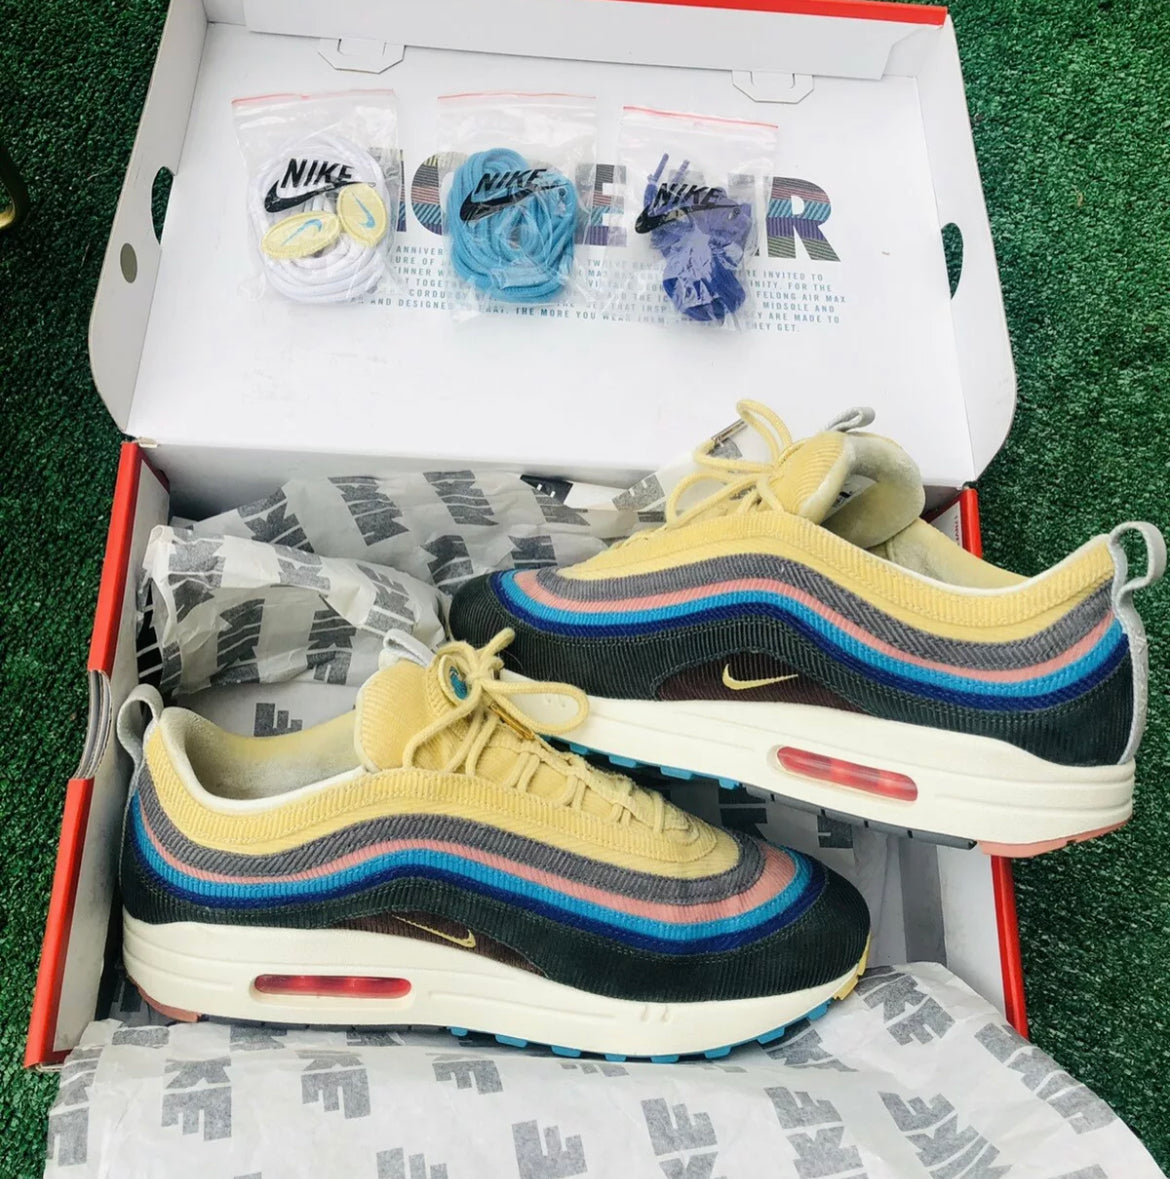 “Sean Wotherspoon” – Rags 2 Riches Apparel